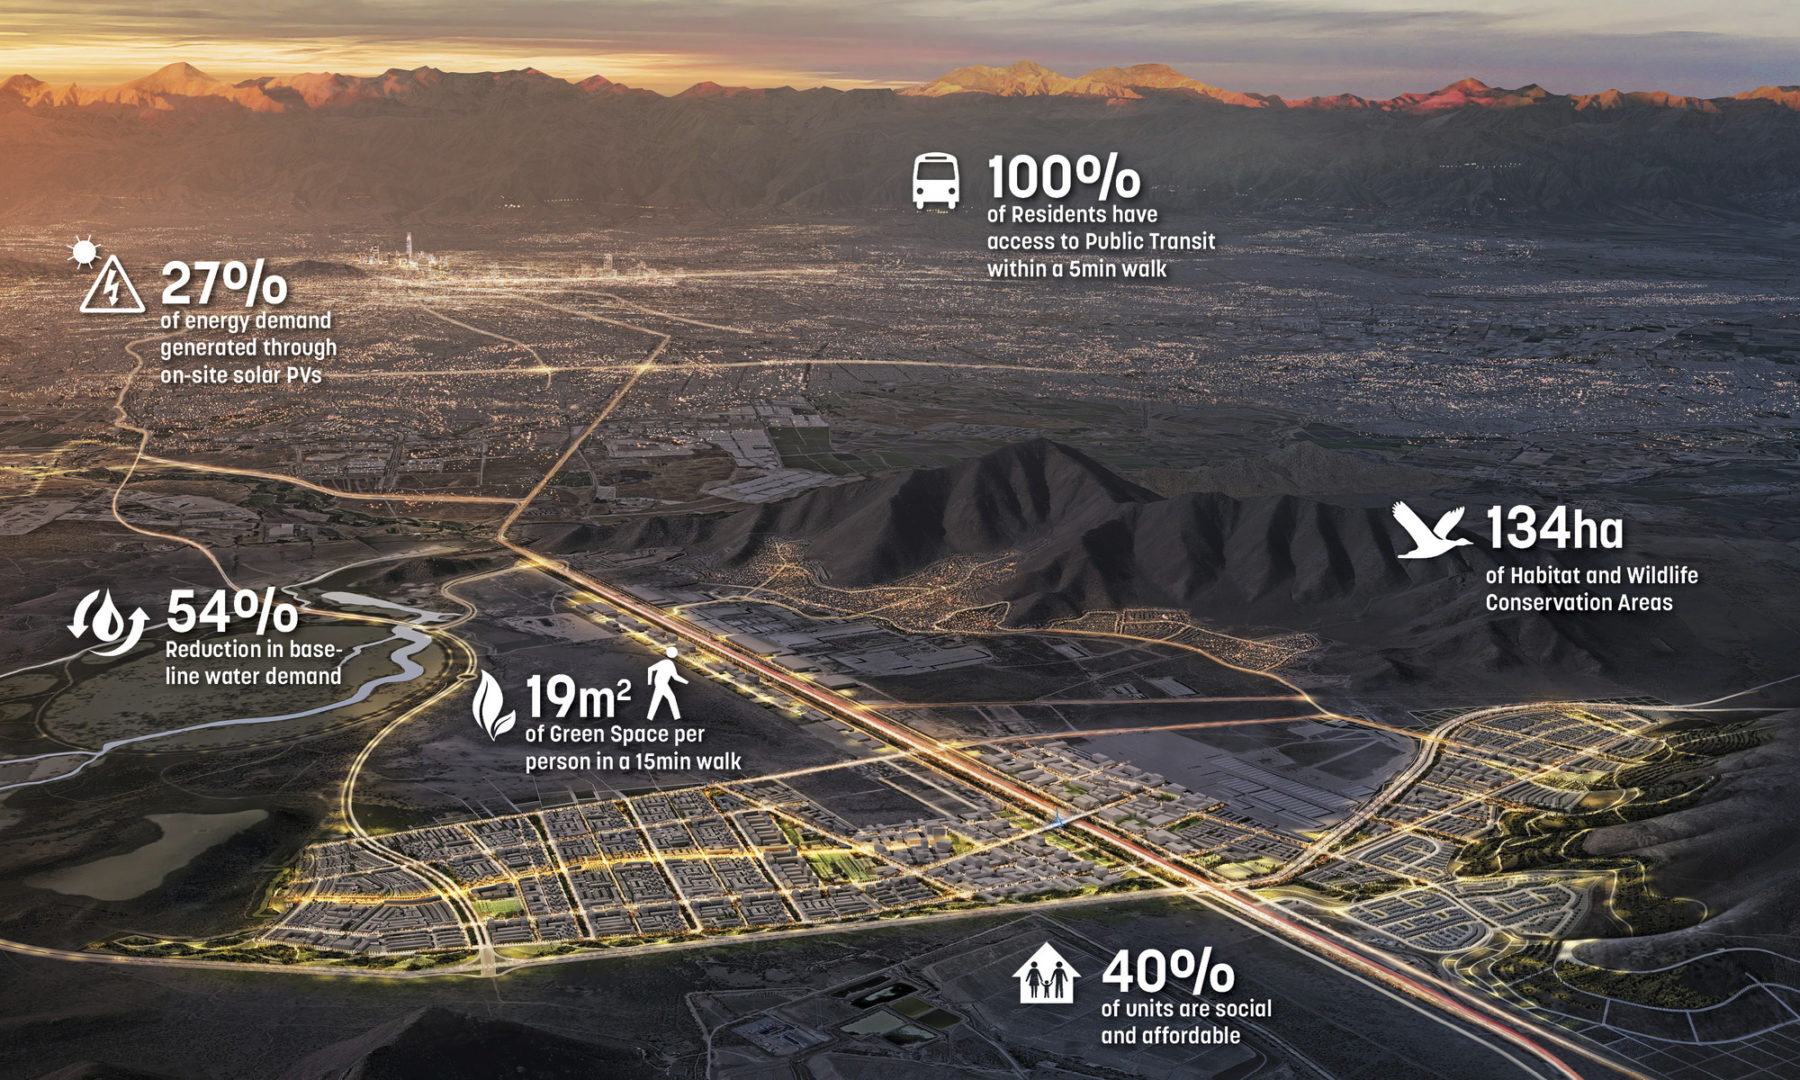 aerial rendering of site at night. text overlaid to display data about project